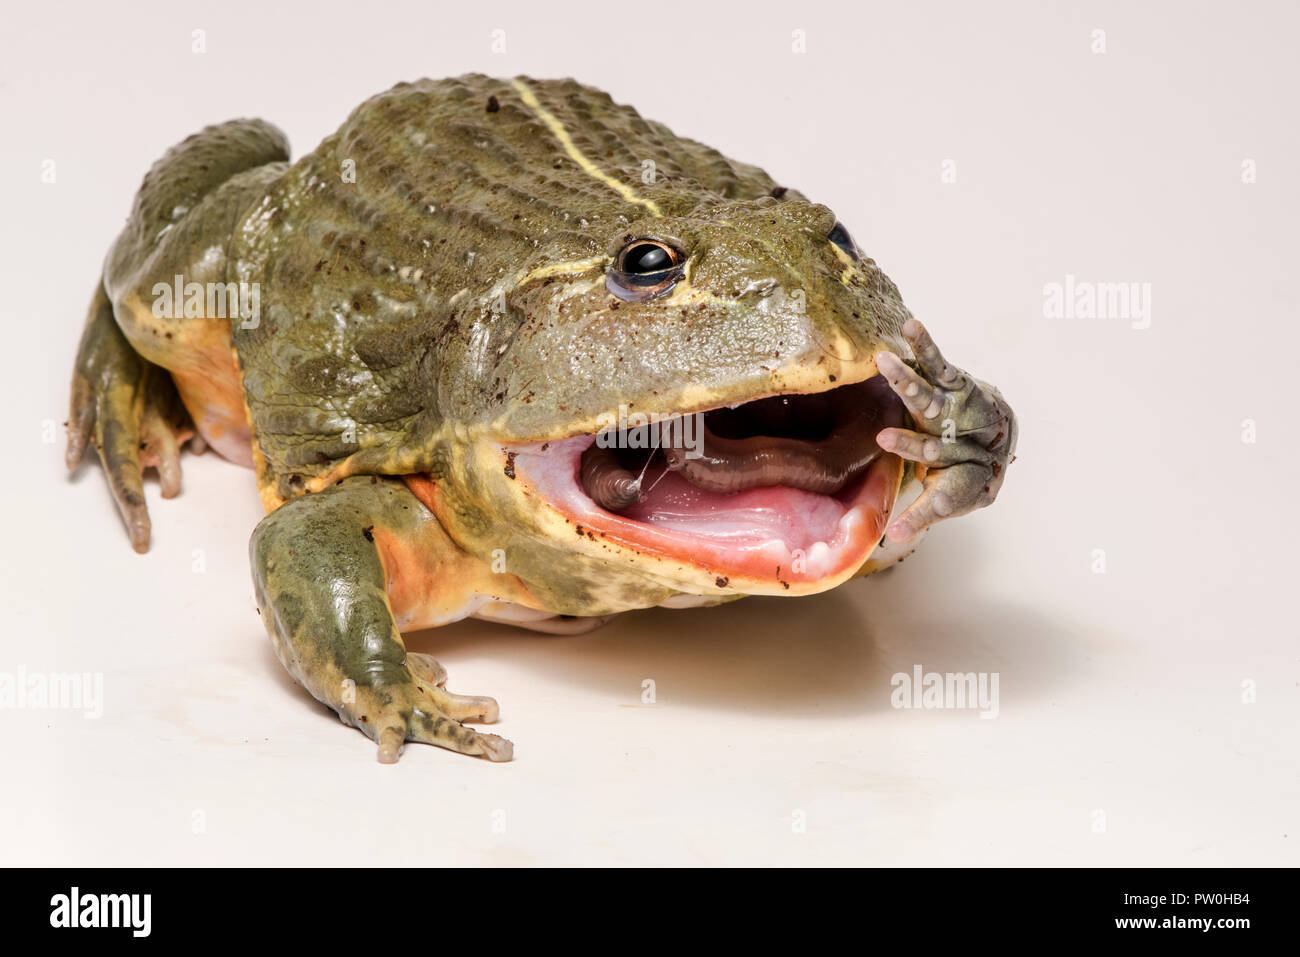 Feeding Time For This Large Male African Bullfrog Pyxicephalus Adspersus Here It Eats A Tasty Worm Isolated On White Stock Photo Alamy,Tequila Brands Cheap